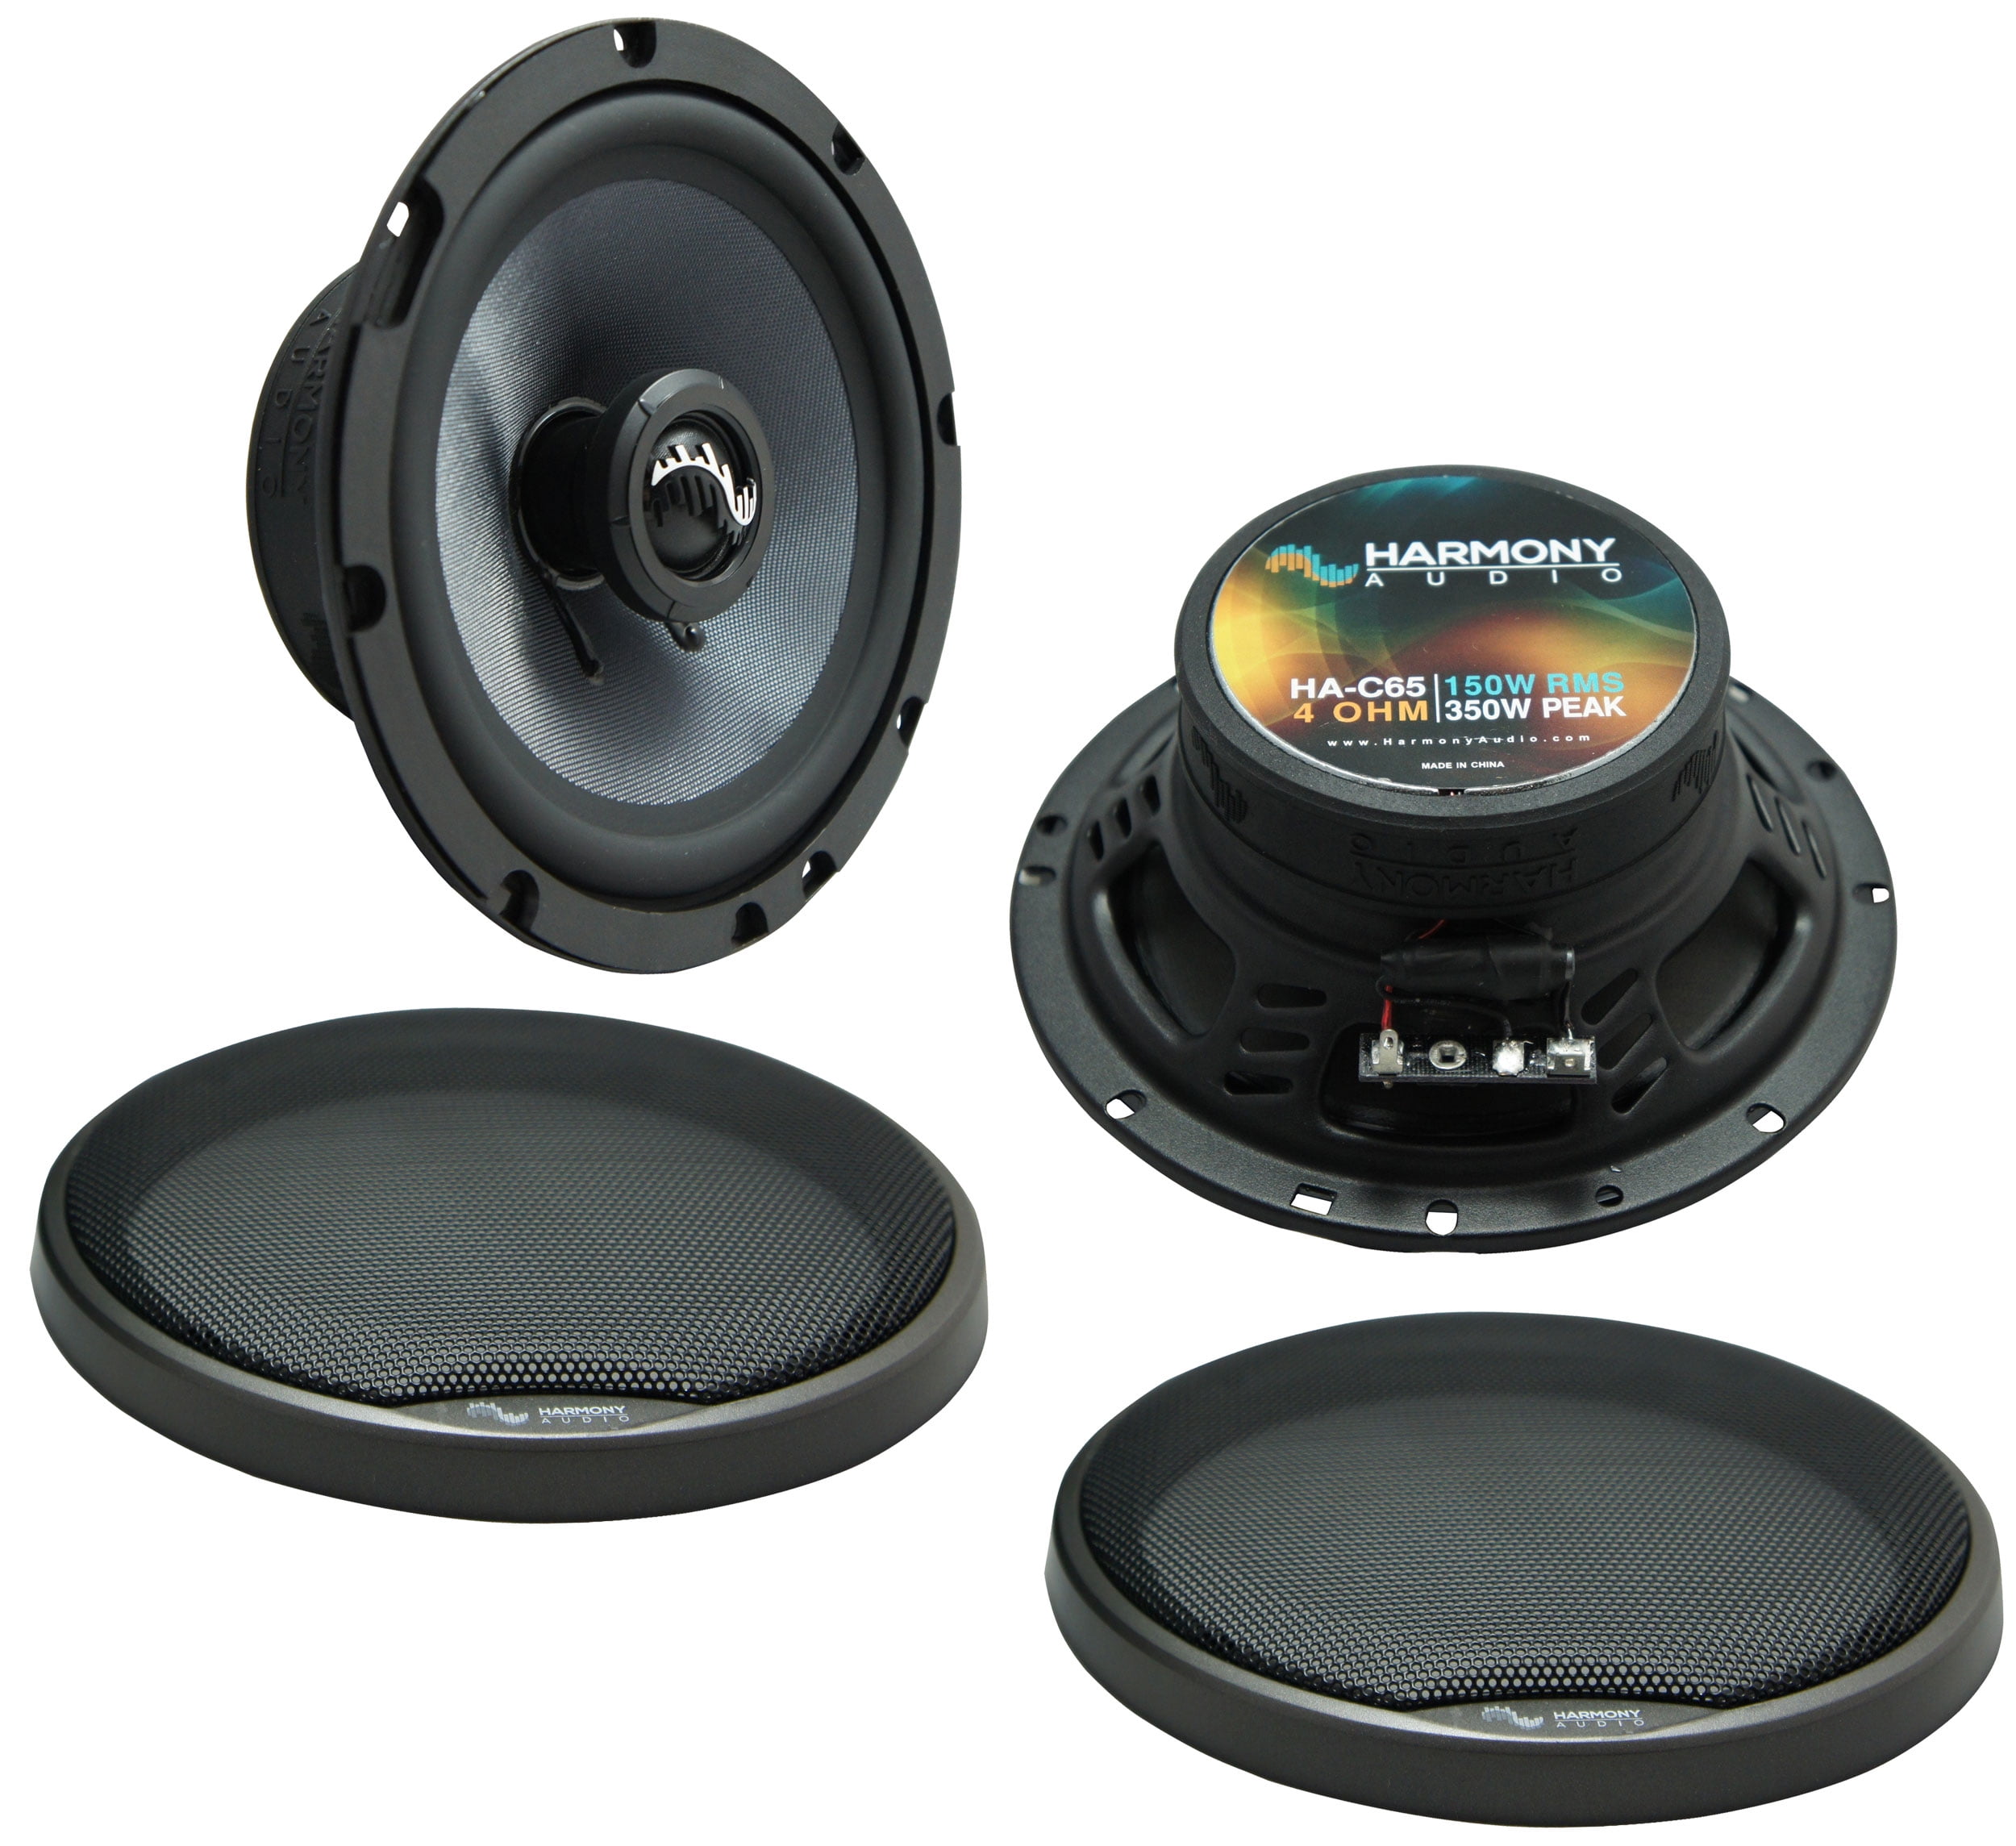 JBL Front & Rear 6.5" Speaker replacement package for 2007-2017 Jeep Wrangler